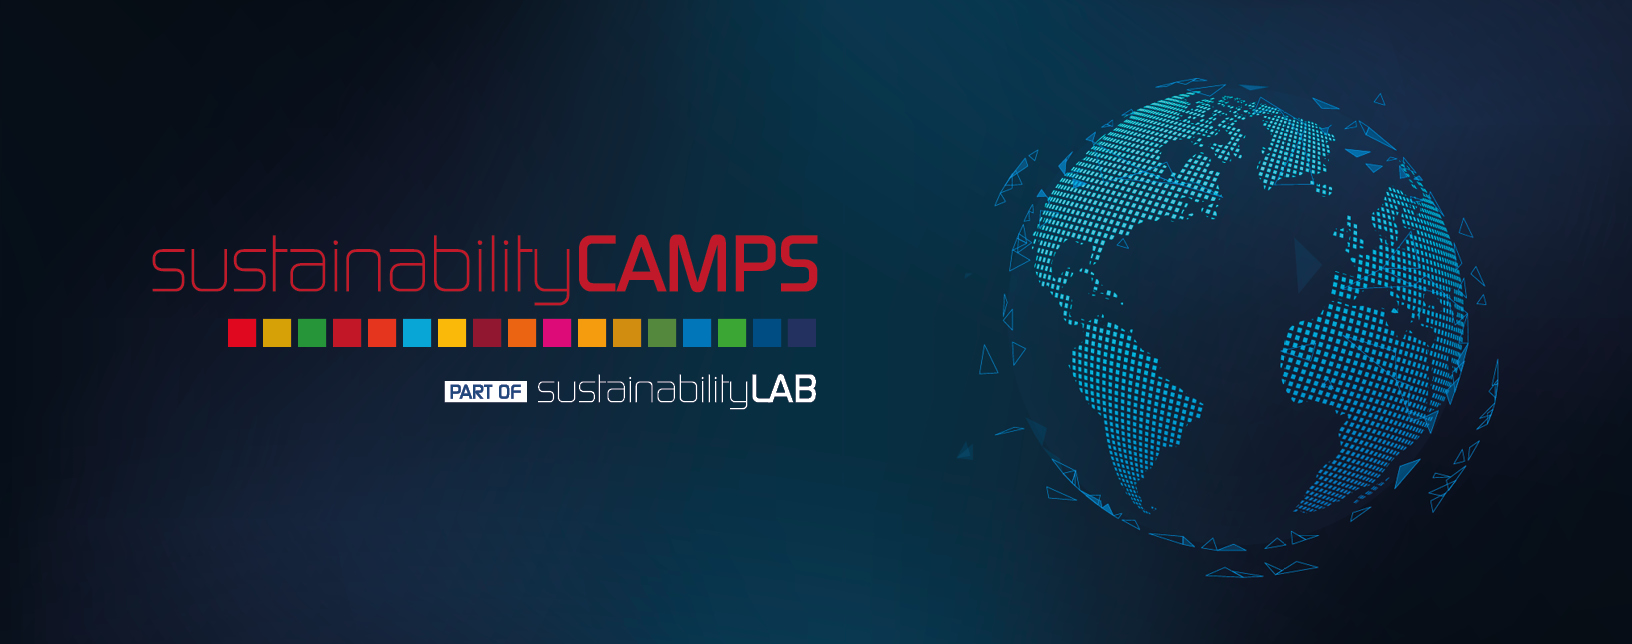 „sustainabilityCAMPS“: #0 CEO-Briefing